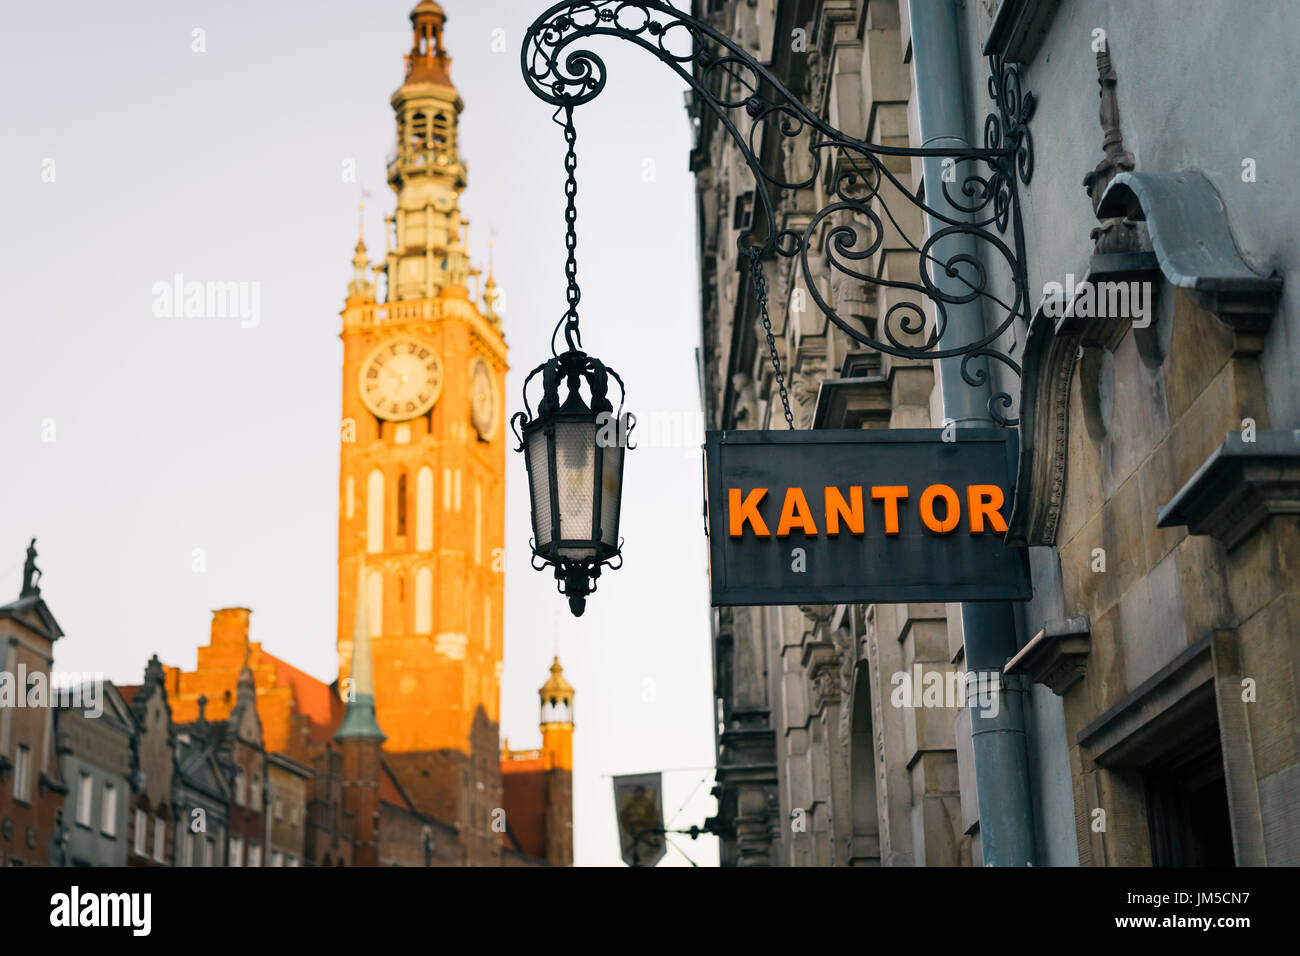 Currency exchange office (polish - kantor) signboard in Old Town of Gdansk Stock Photo